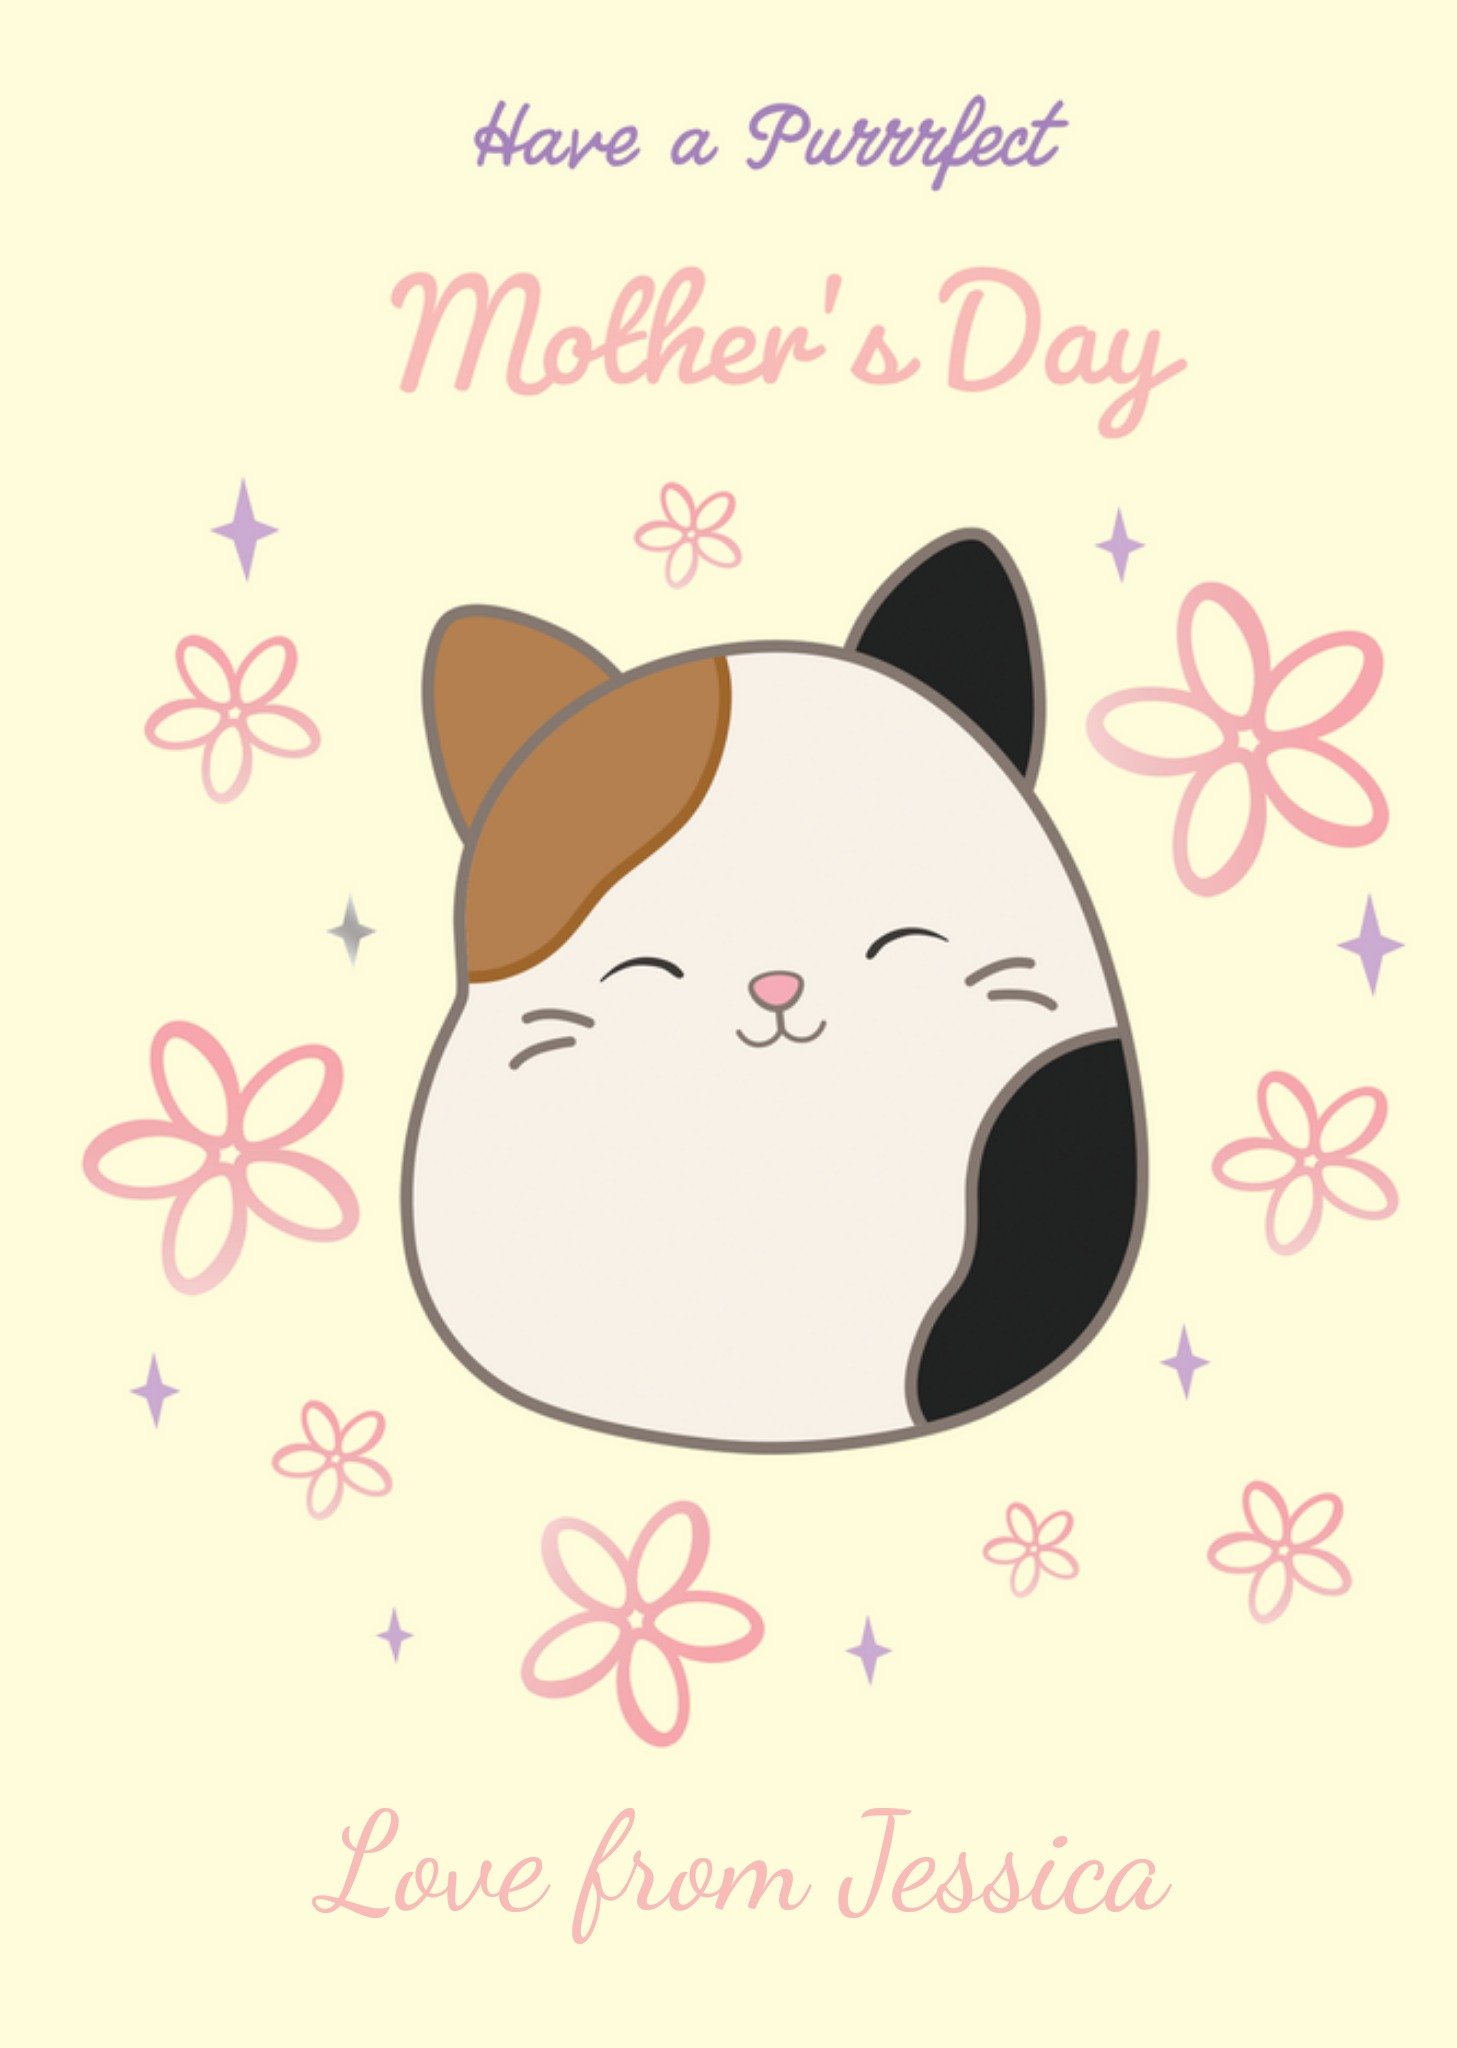 Moonpig Squishmallows Calico Cat Have A Purrrfect Mother's Day Card, Large